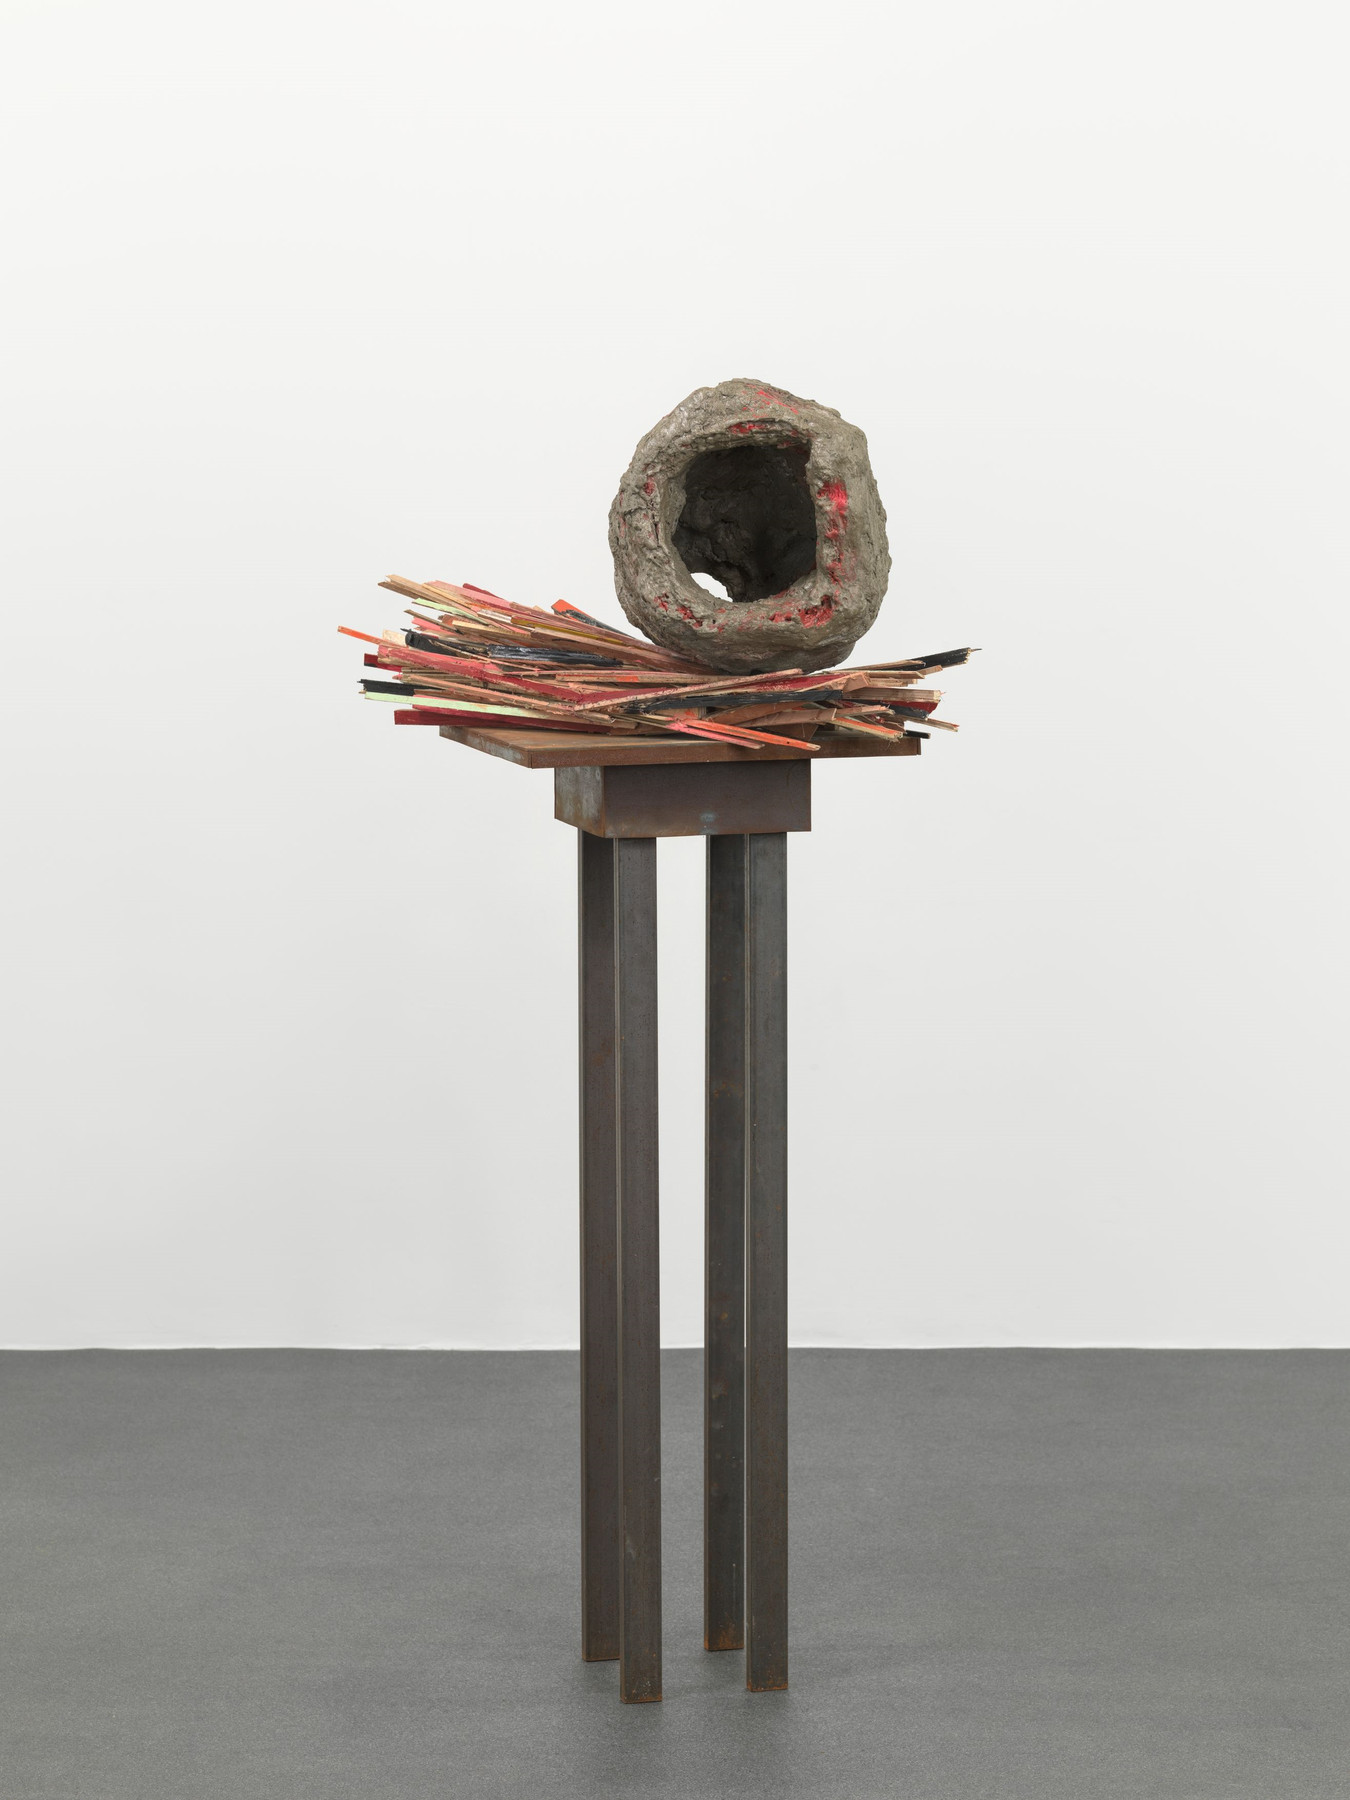 ART OF BRICOLAGE: BRICOLAGE: Art With Dimensional Materials - Phyllida  Barlow